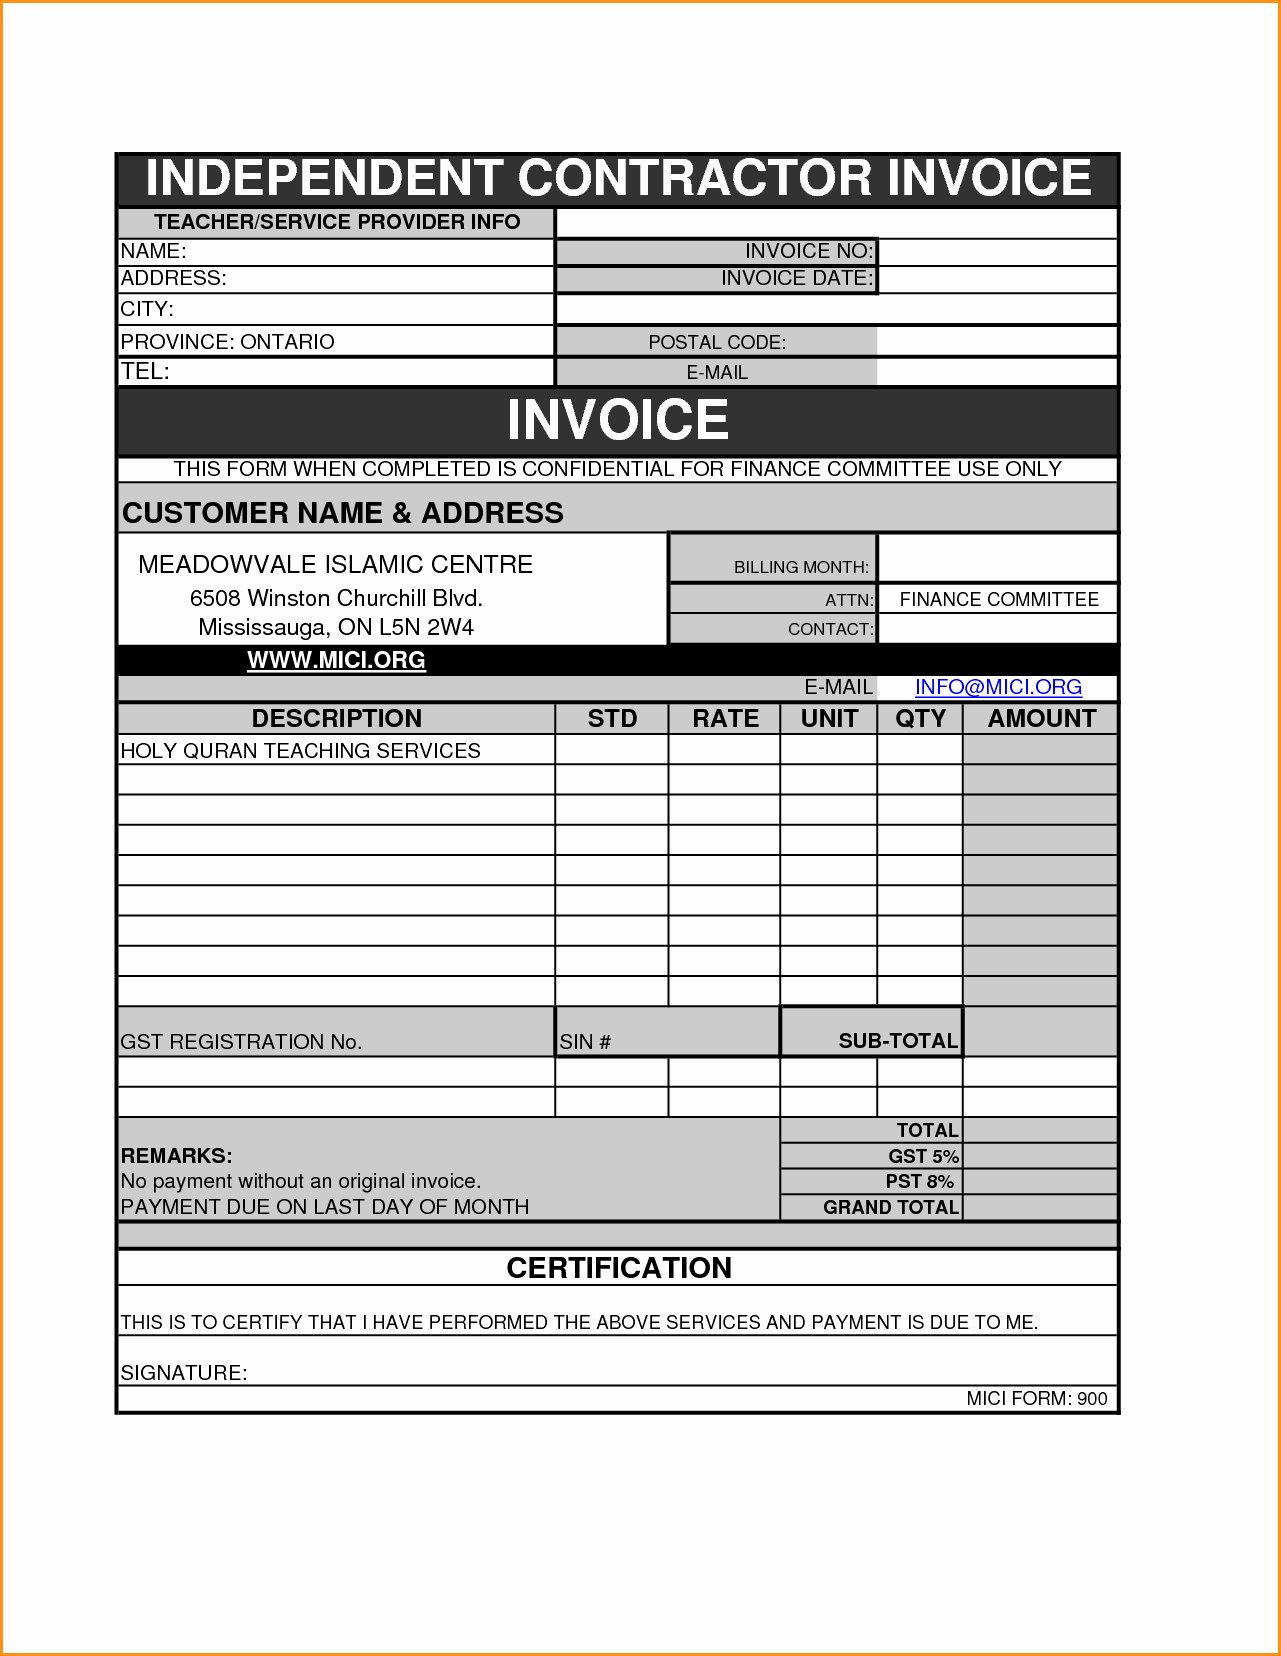 Independent Contractor Invoice Template Lovely Sample Invoice for Independent Contractor – Amandae